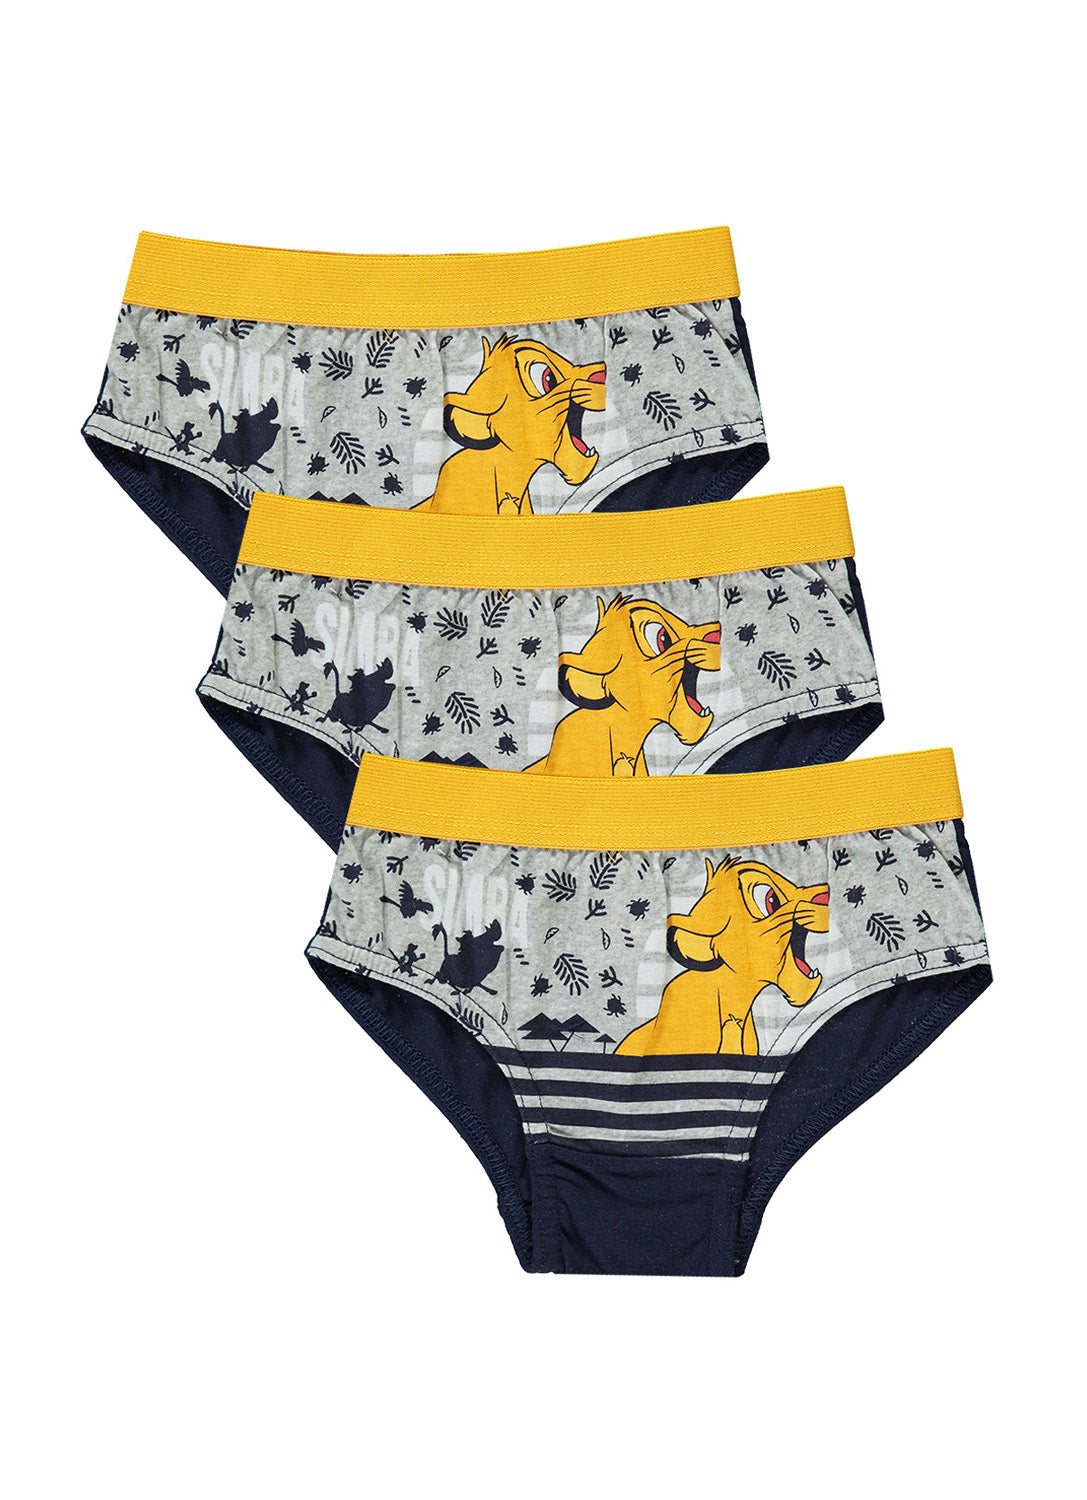 3 Underwear for Boys with Lion King prints